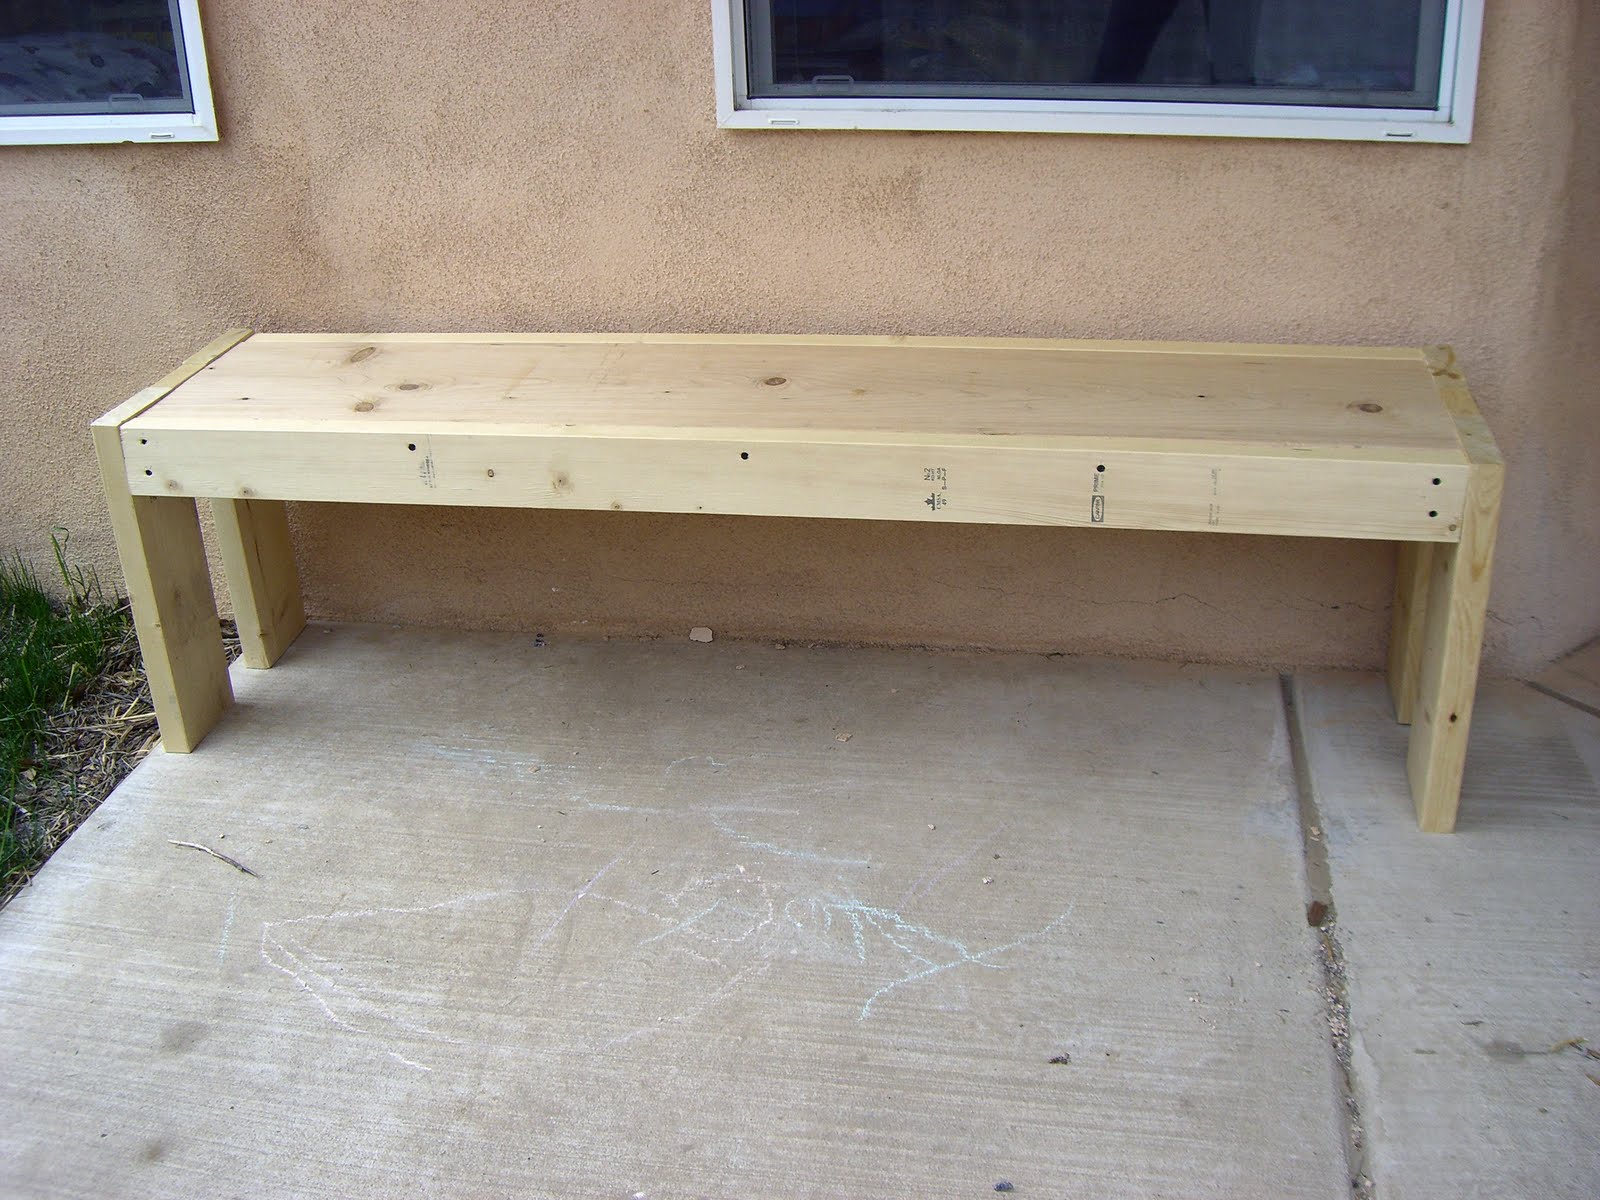  bench plans wooden bench plans simple wooden bench plans free wooden